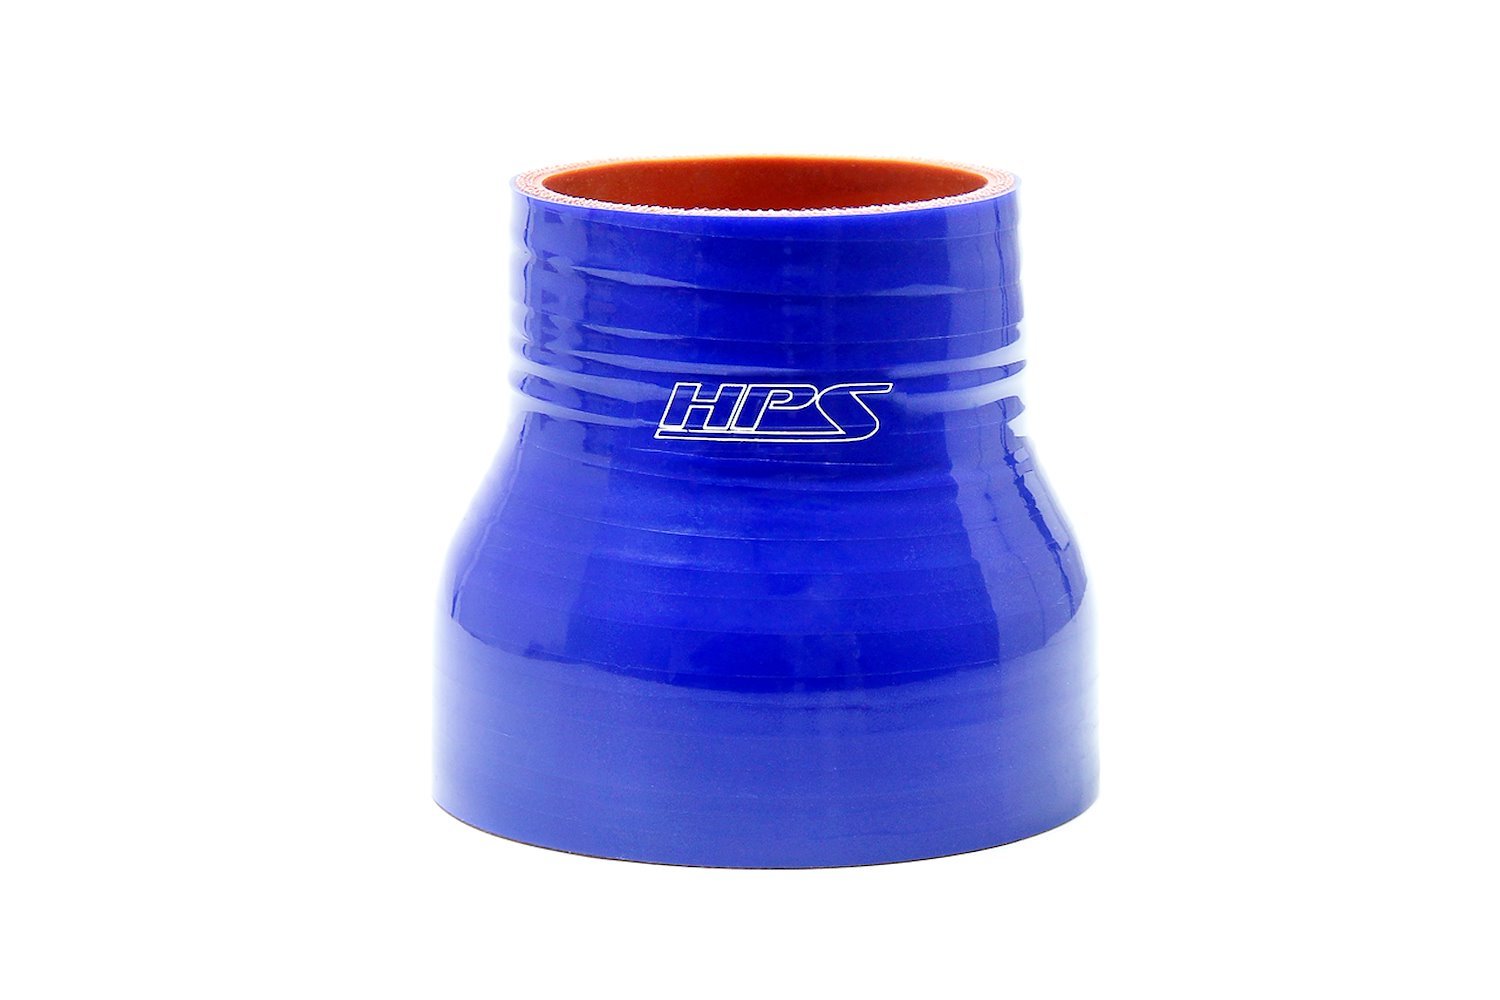 HTSR-250-375-BLUE Silicone Reducer Hose, High-Temp 4-Ply Reinforced, 2-1/2 in. - 3-3/4 in. ID, 3 in. Long, Blue